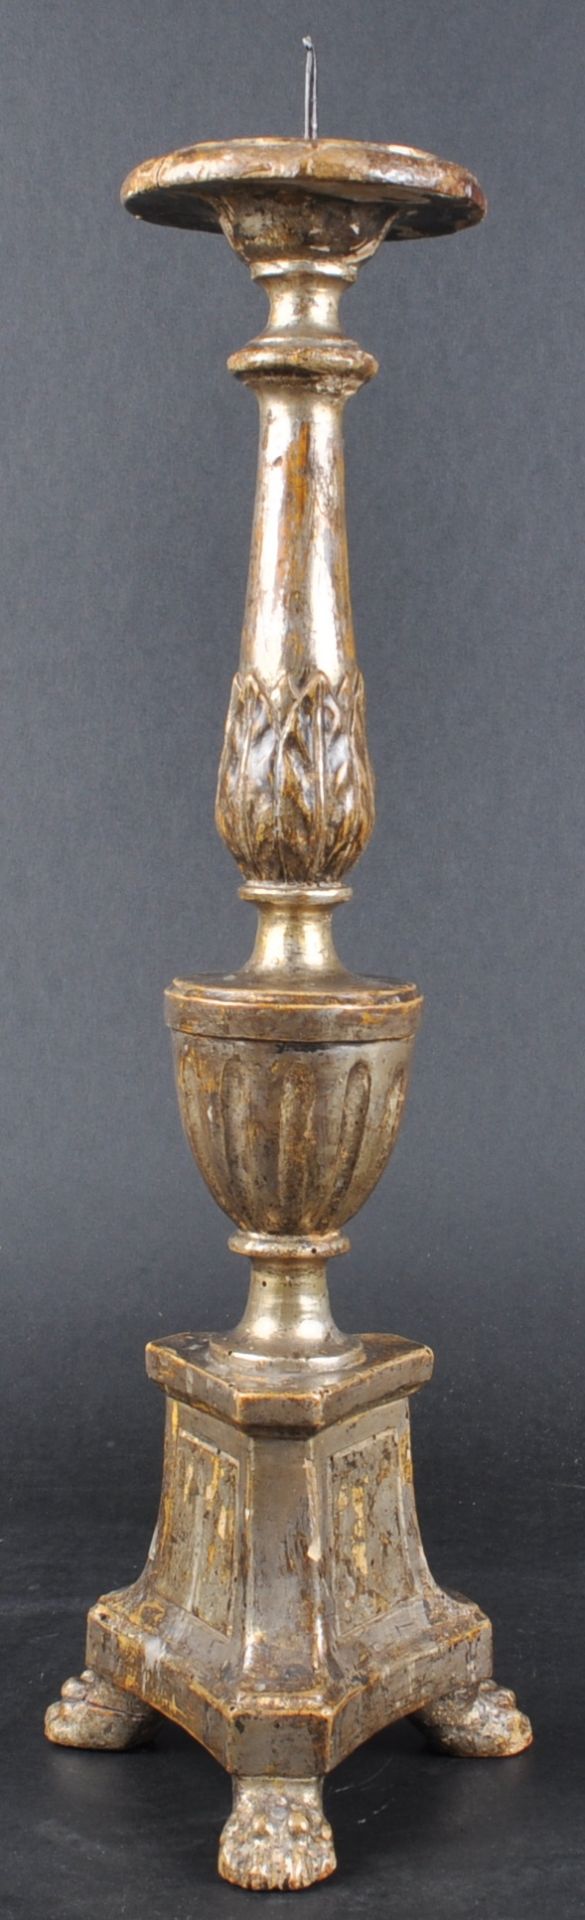 19TH CENTURY ITALIAN CARVED ALTAR CANDLESTICK - Image 4 of 4